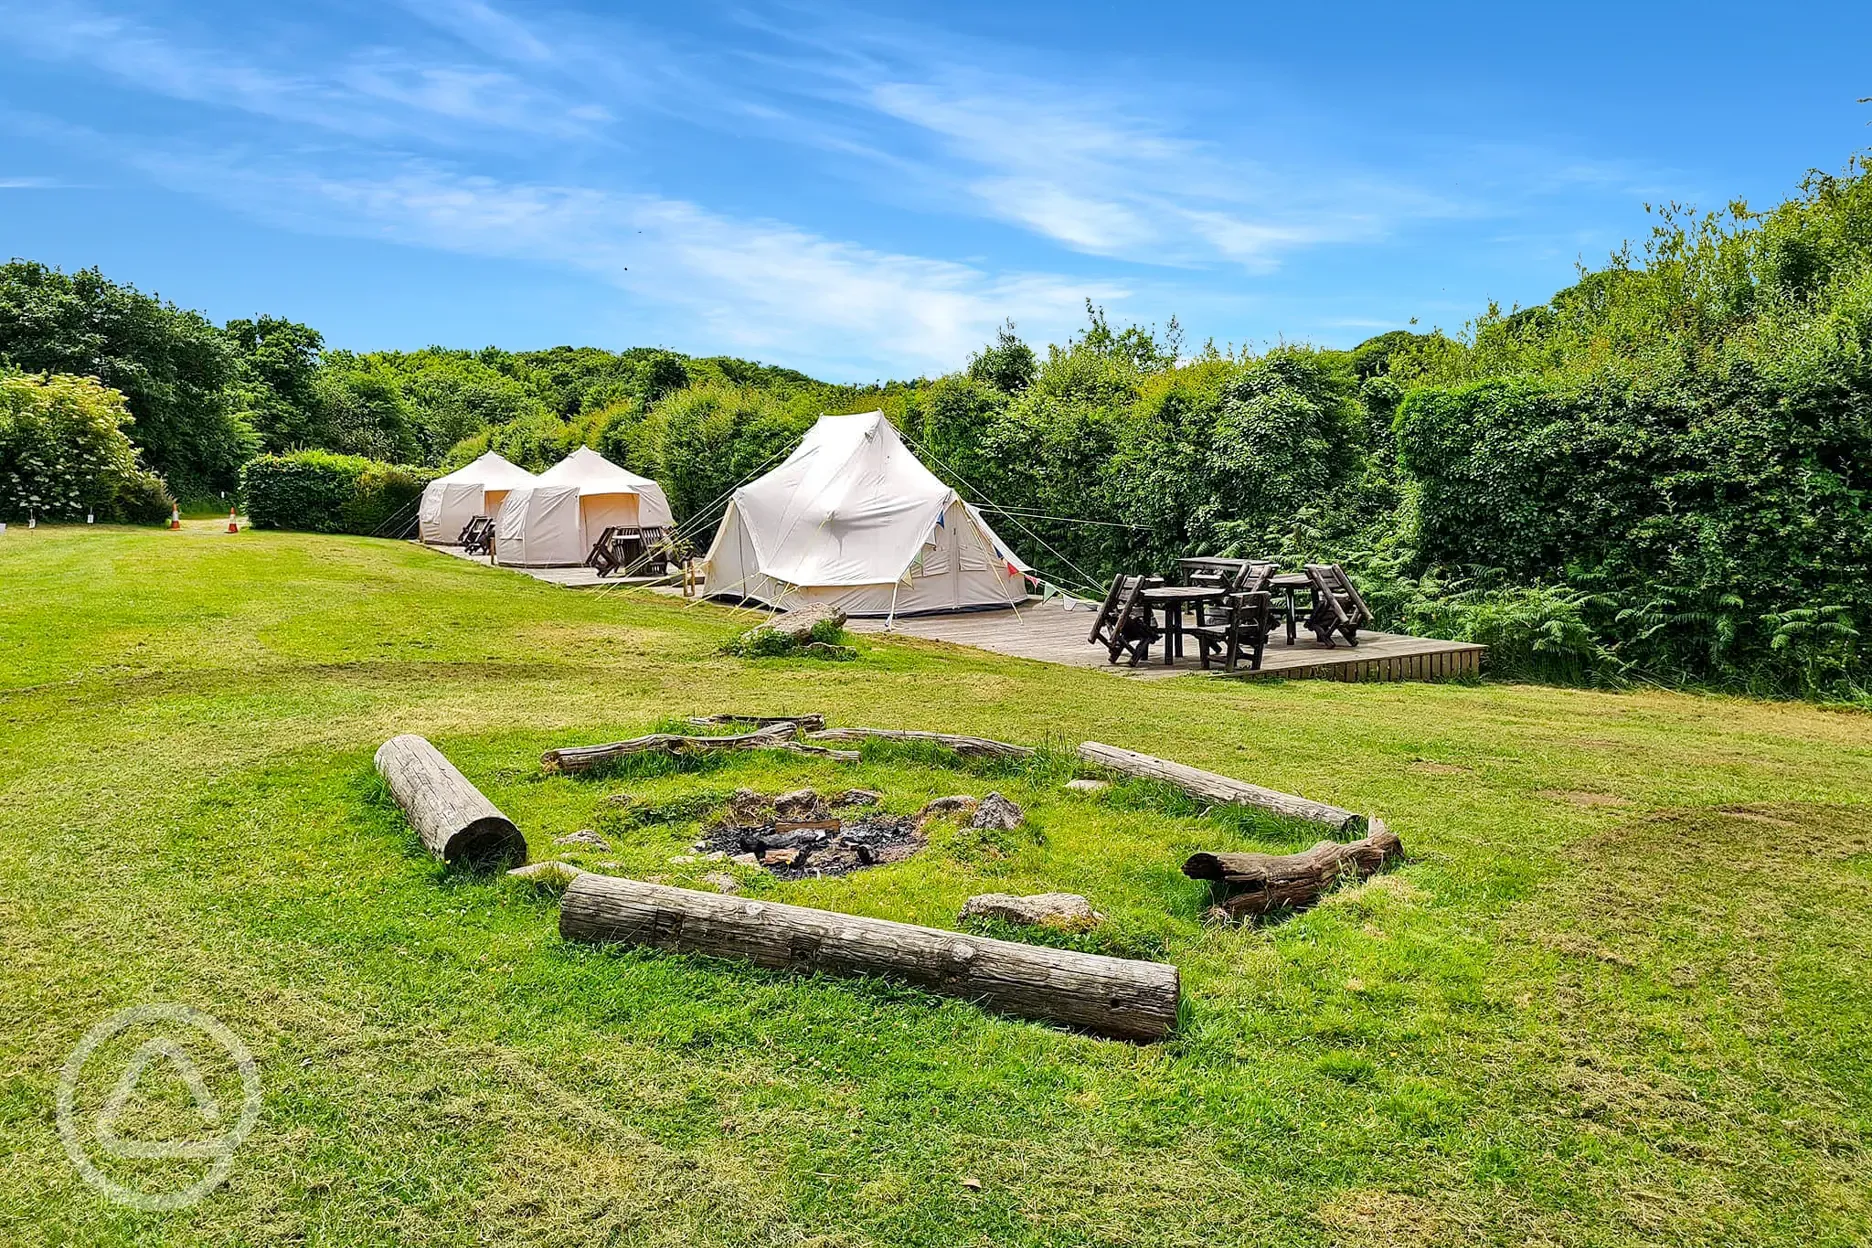 Communal fire pit and bell tents